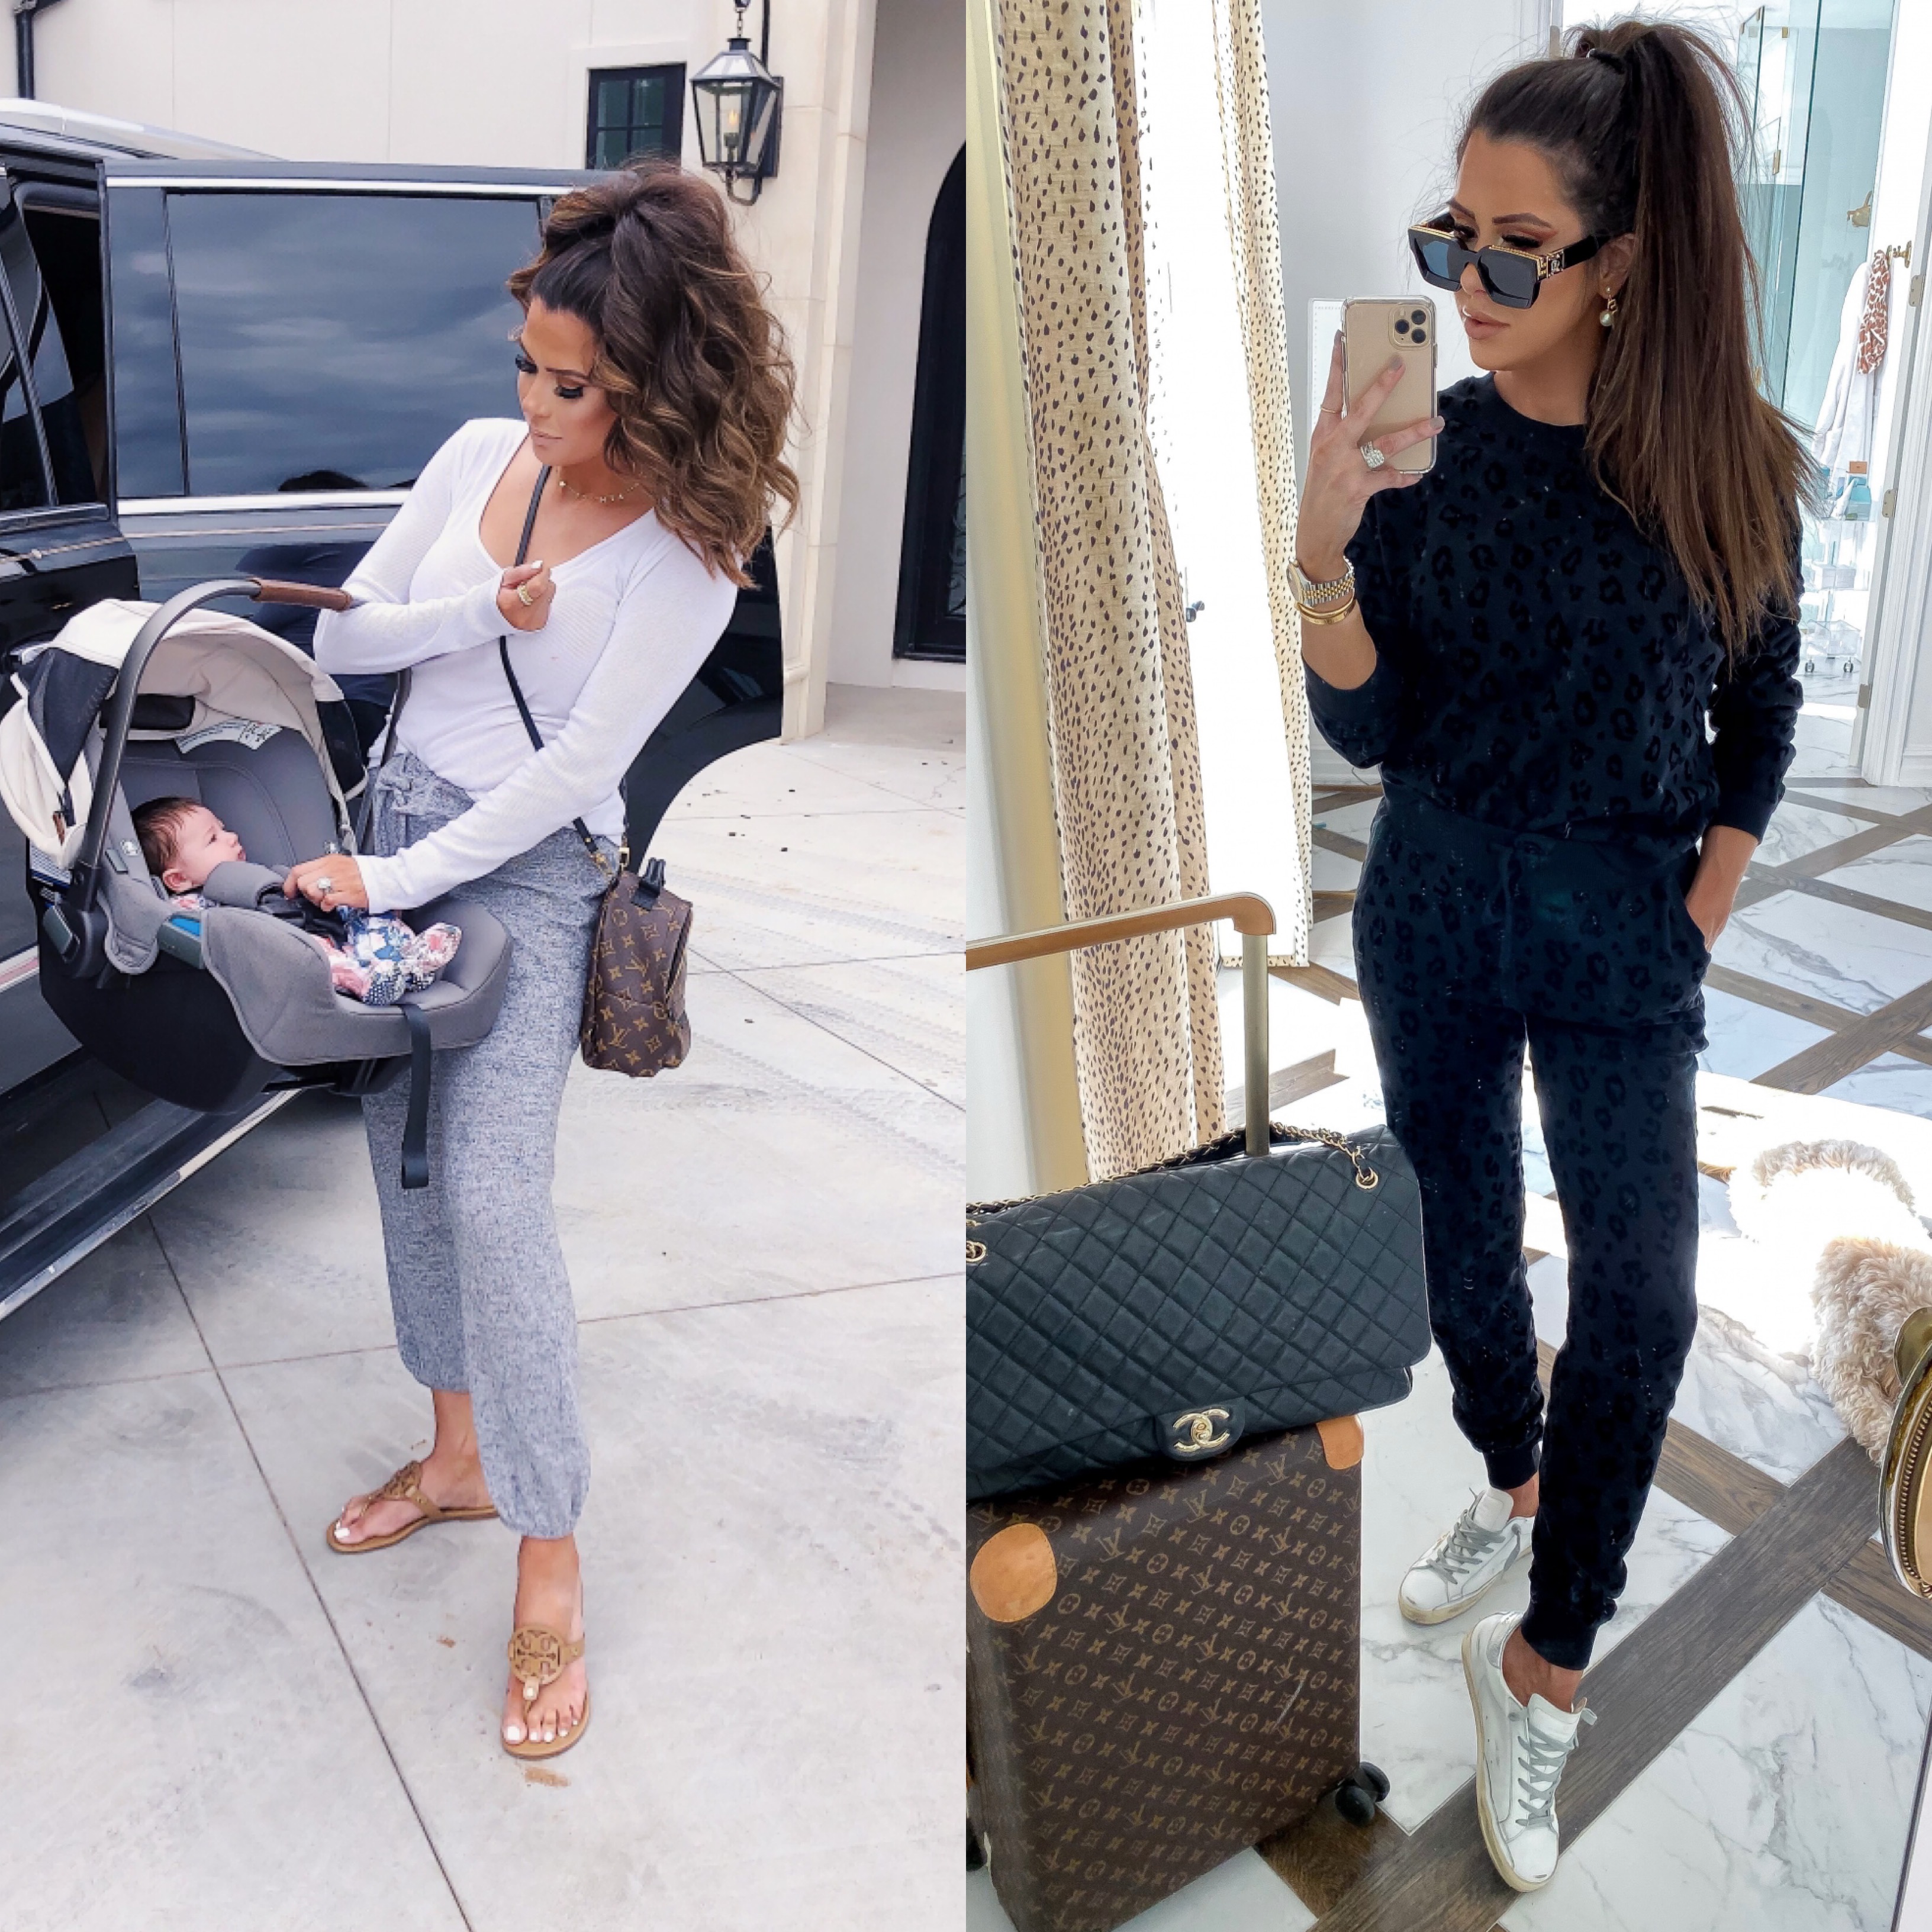 best of loungewear 2019 | best athletic leggings lululemon, zella, spanx review | Best Wardrobe Essentials 2019👖 | Part 2 by popular US fashion blog, The Sweetest Thing: collage image of a woman wearing ShopBop ZSupply loungewear, Buddy Love loungewear, and Nordstrom BP loungewear.